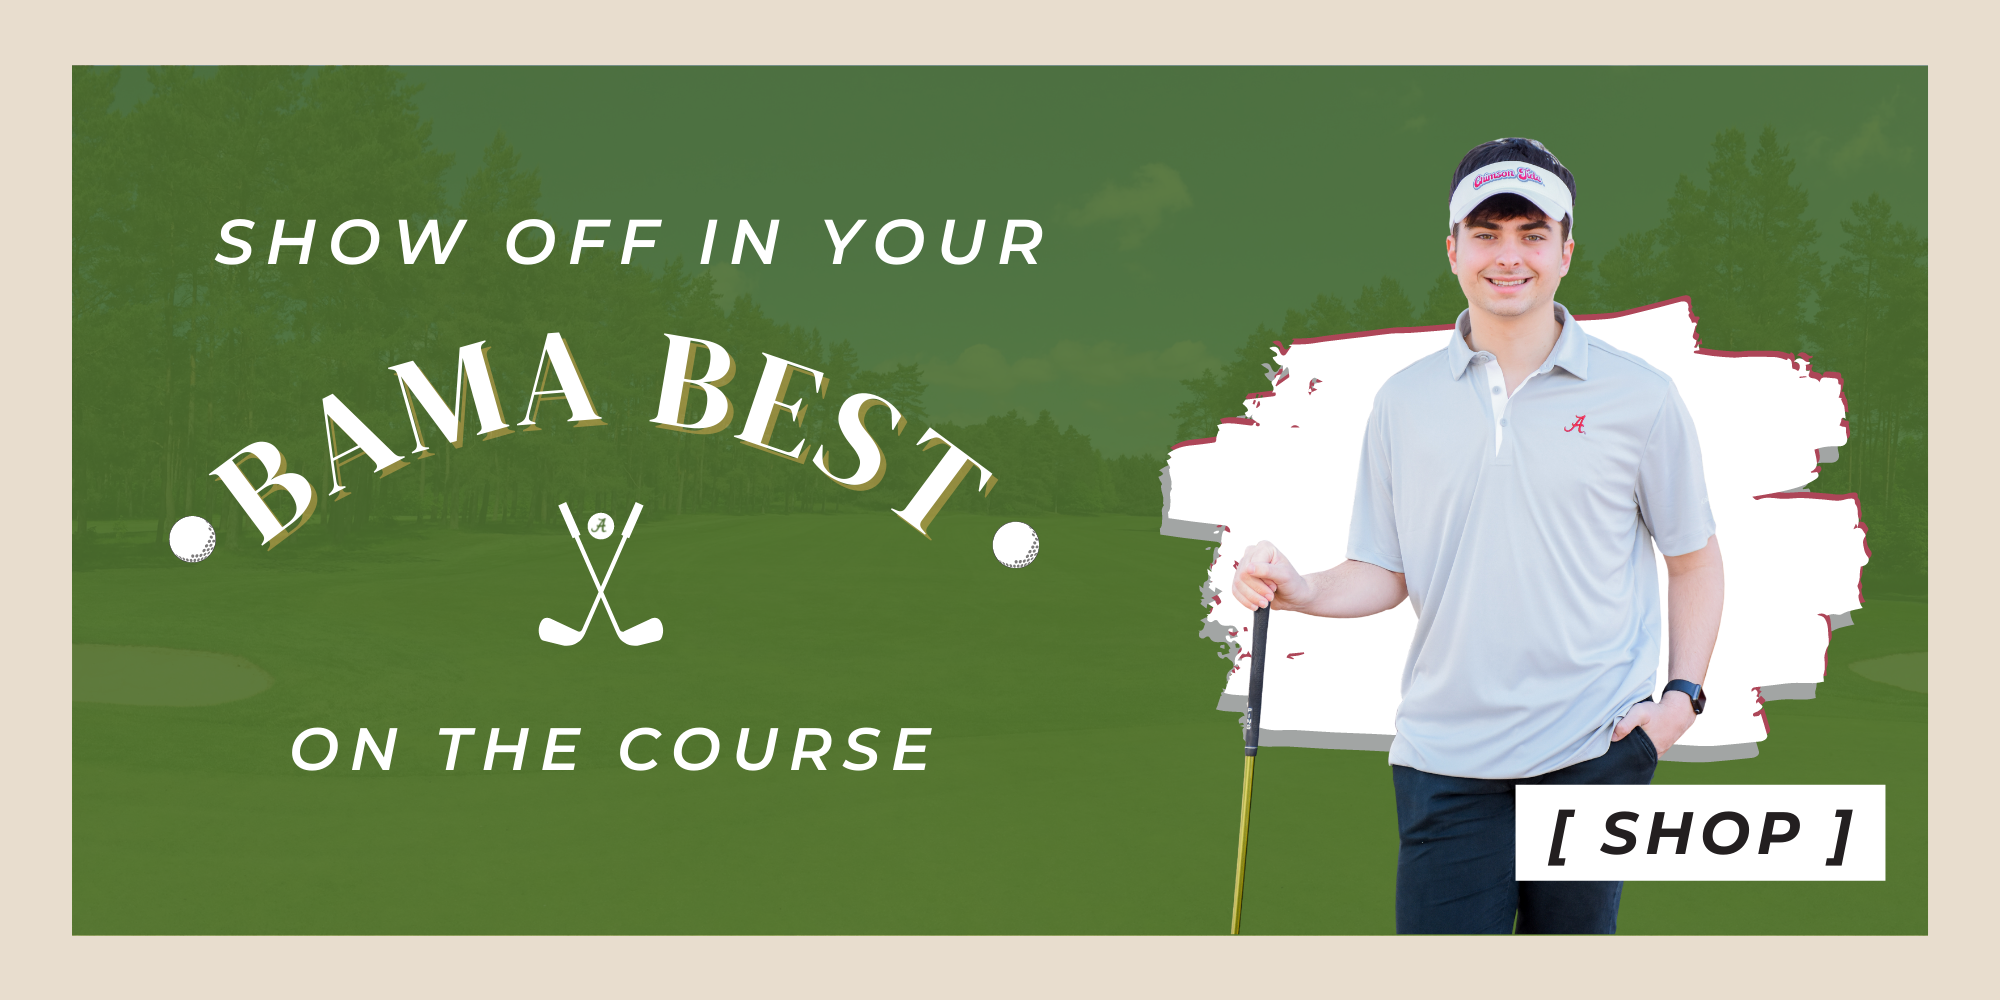 Show Off In Your BAMA BEST on the course.  Shop the Alabama Golf catalog while supplies last.   